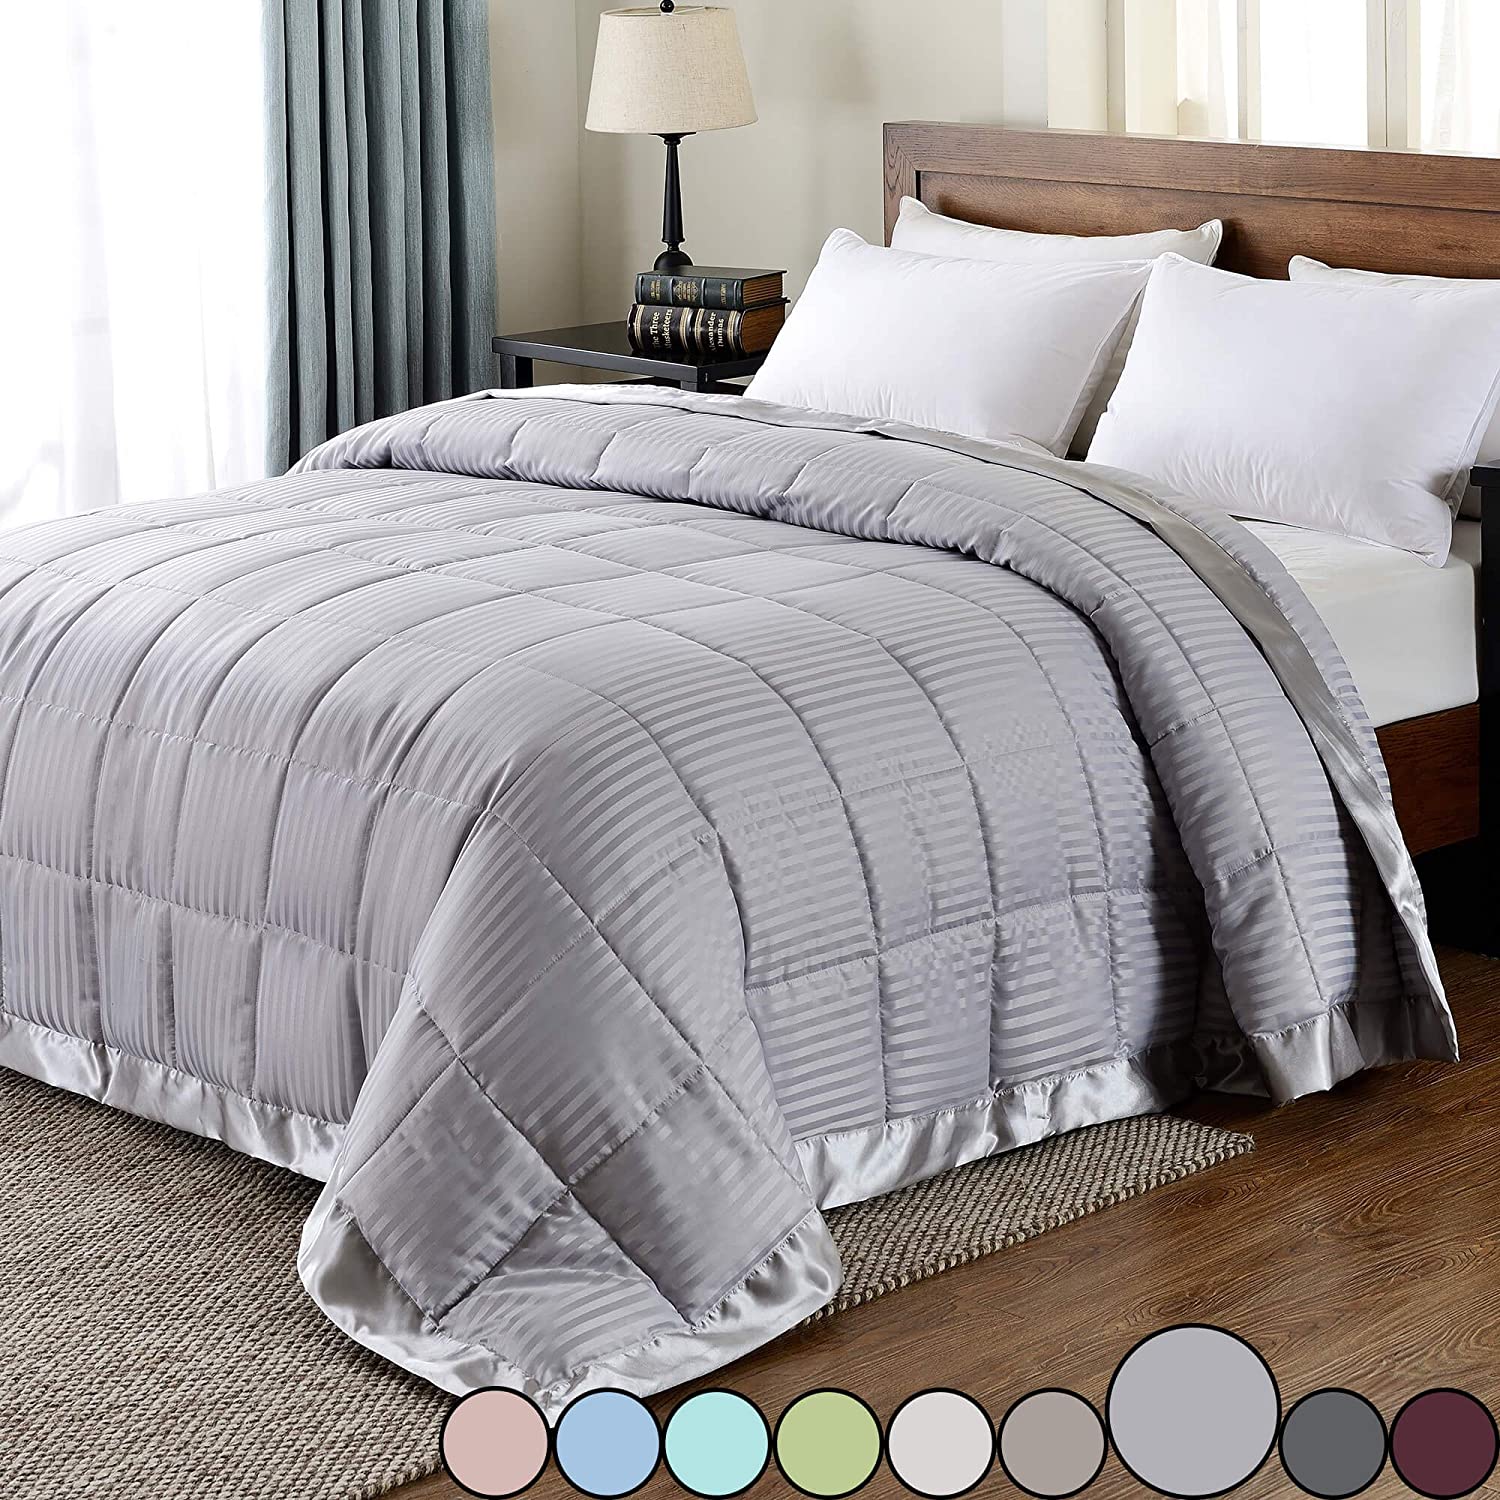 Details about   downluxe Lightweight King Down Alternative Blanket with Satin Trim Silver 90 X 